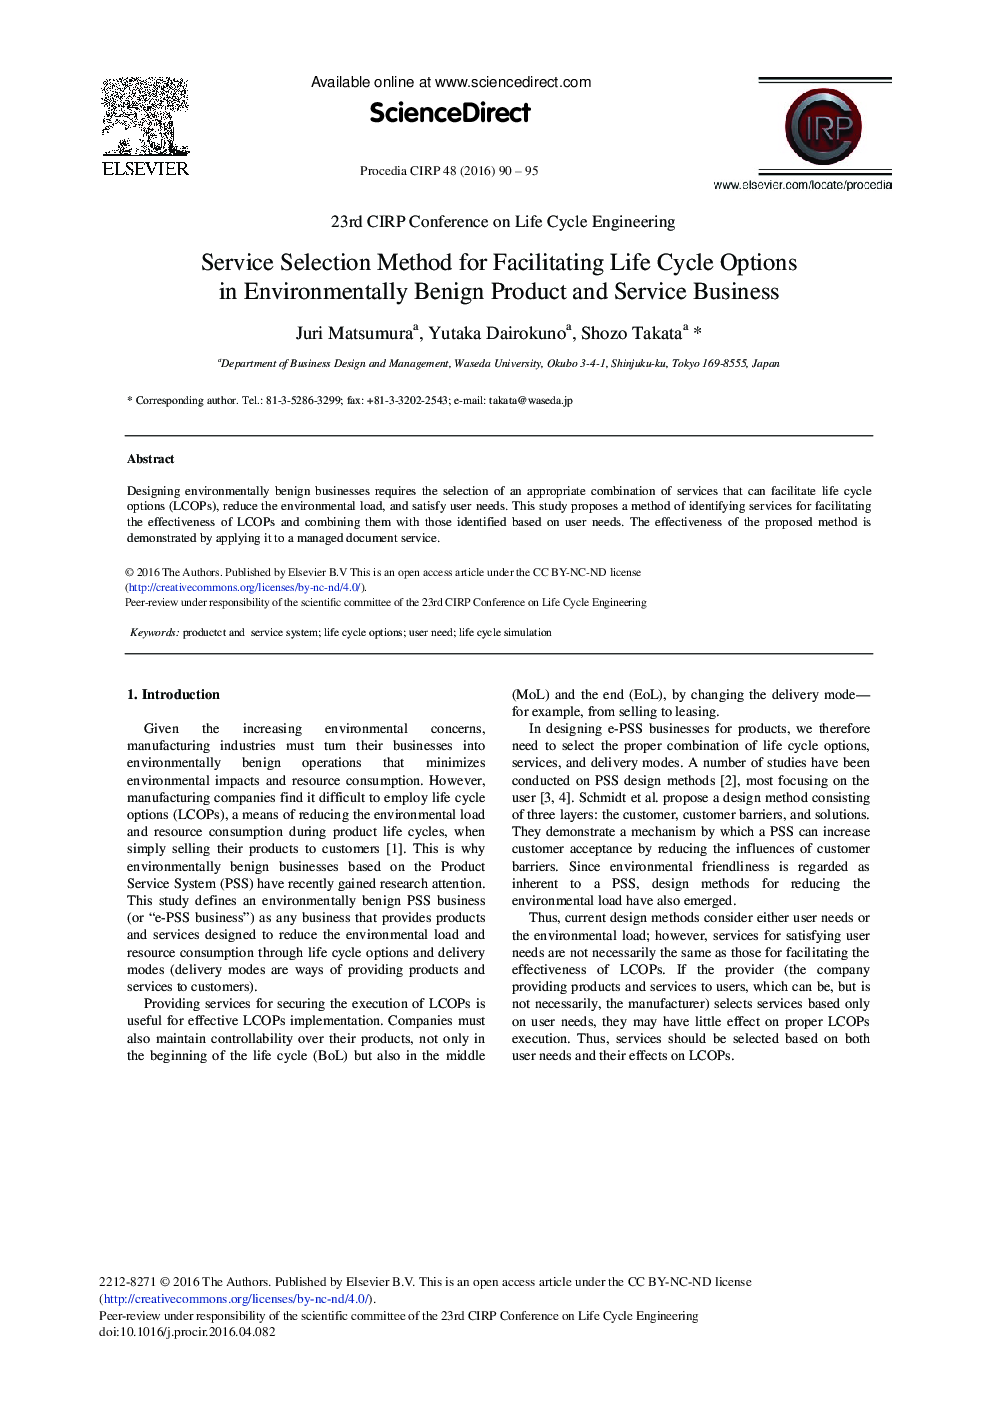 Service Selection Method for Facilitating Life Cycle Options in Environmentally Benign Product and Service Business 